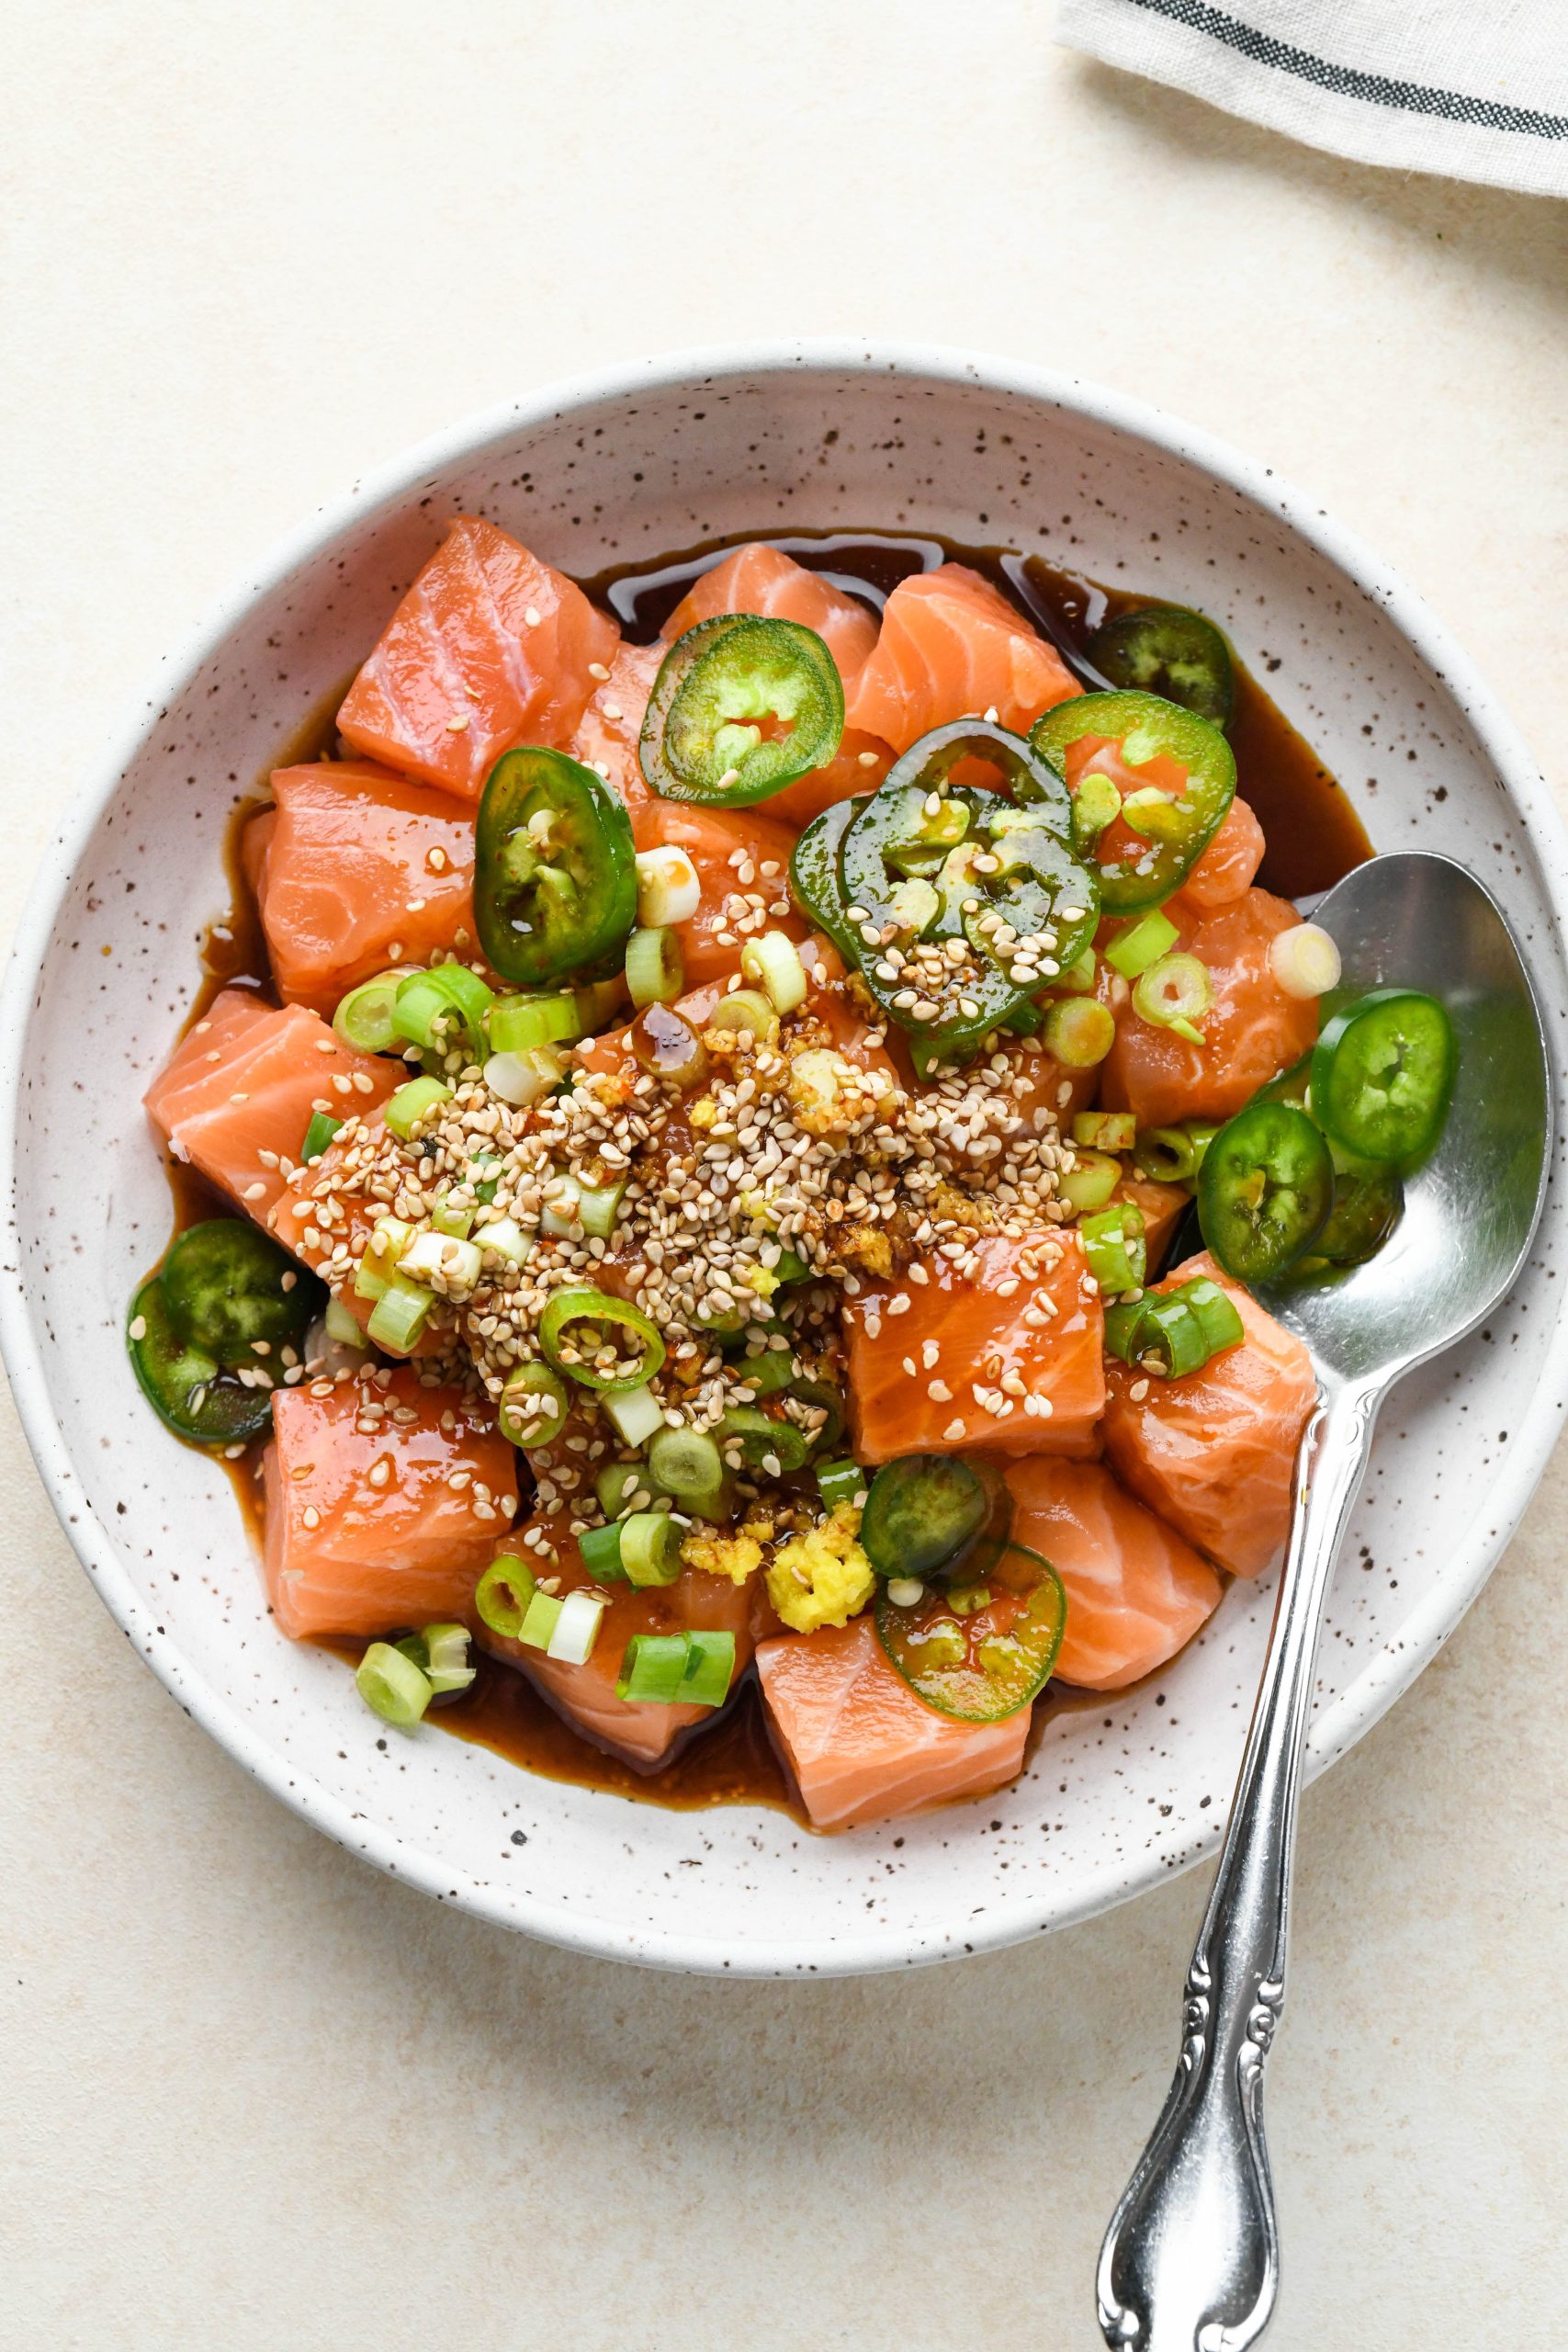 How to make poke bowls: Raw salmon with jalapeño, grated ginger, green onions, and sesame seeds in a shallow bowl topped with poke sauce, before mixing.